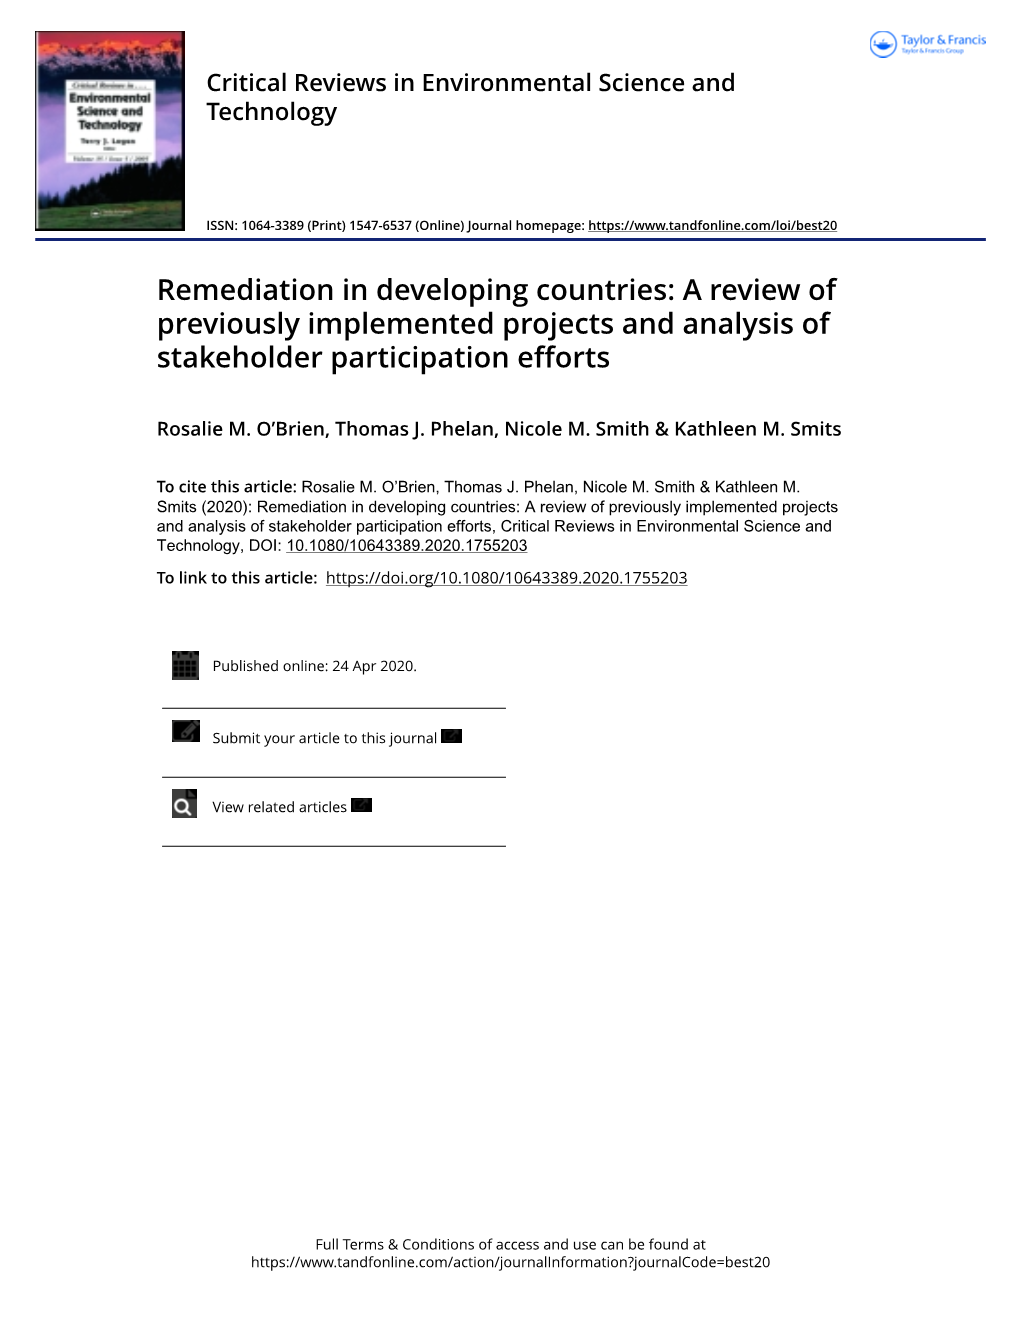 Remediation in Developing Countries: a Review of Previously Implemented Projects and Analysis of Stakeholder Participation Efforts